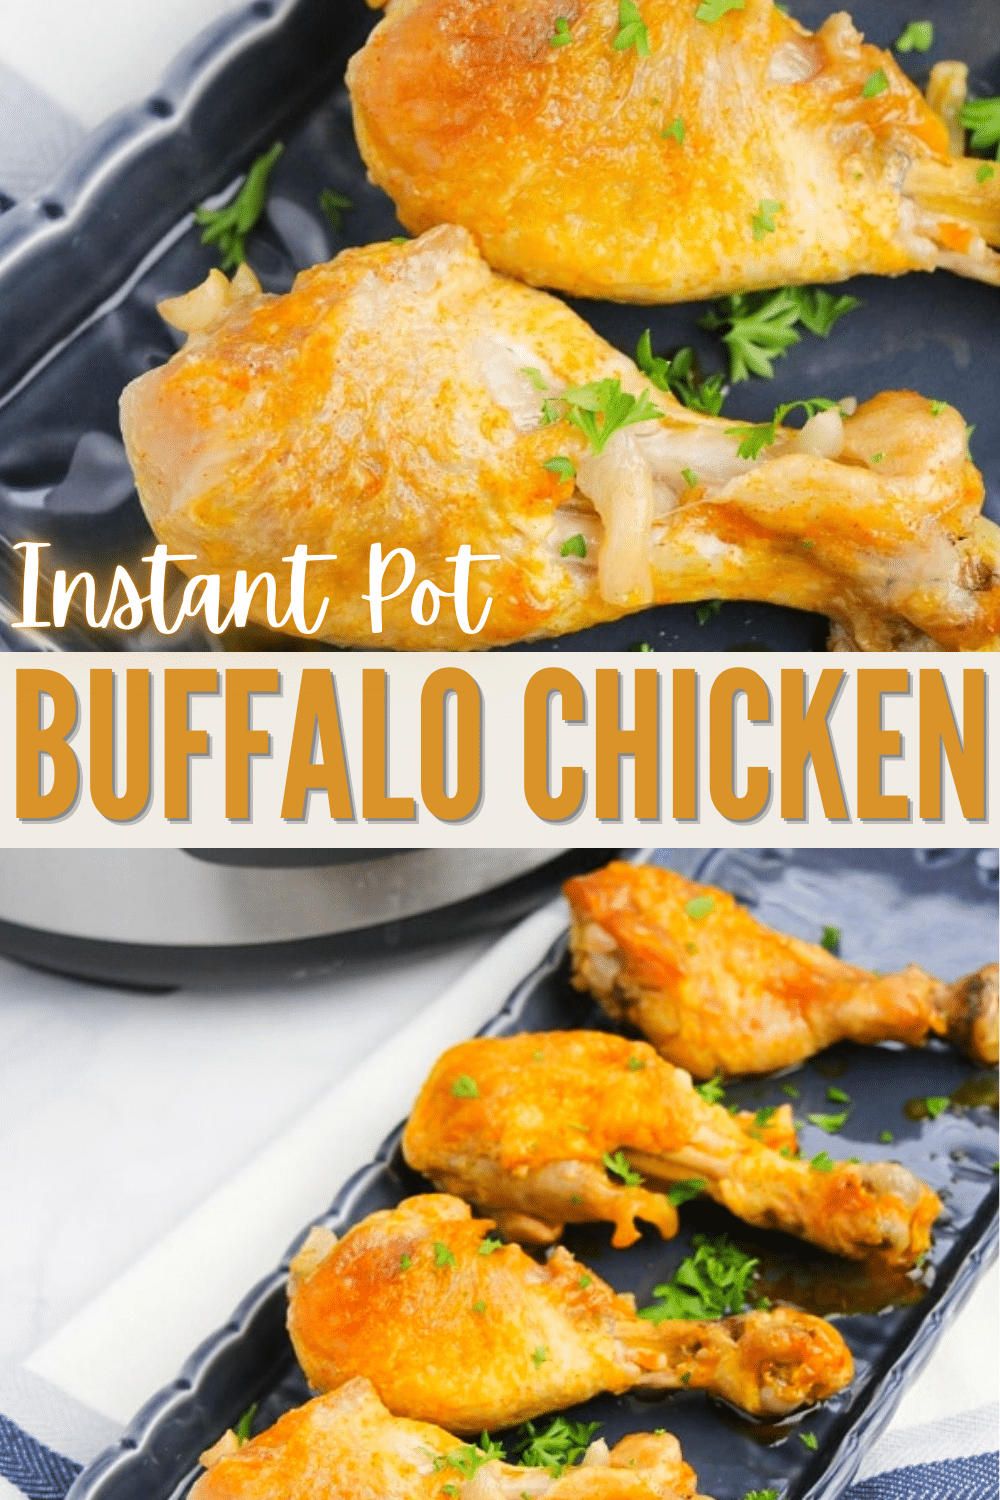 This Instant Pot Buffalo Chicken has all the familiar flavor of this popular appetizer but is way easier (and less messy) to make! #instantpotrecipe #pressurecooker #appetizer via @wondermomwannab